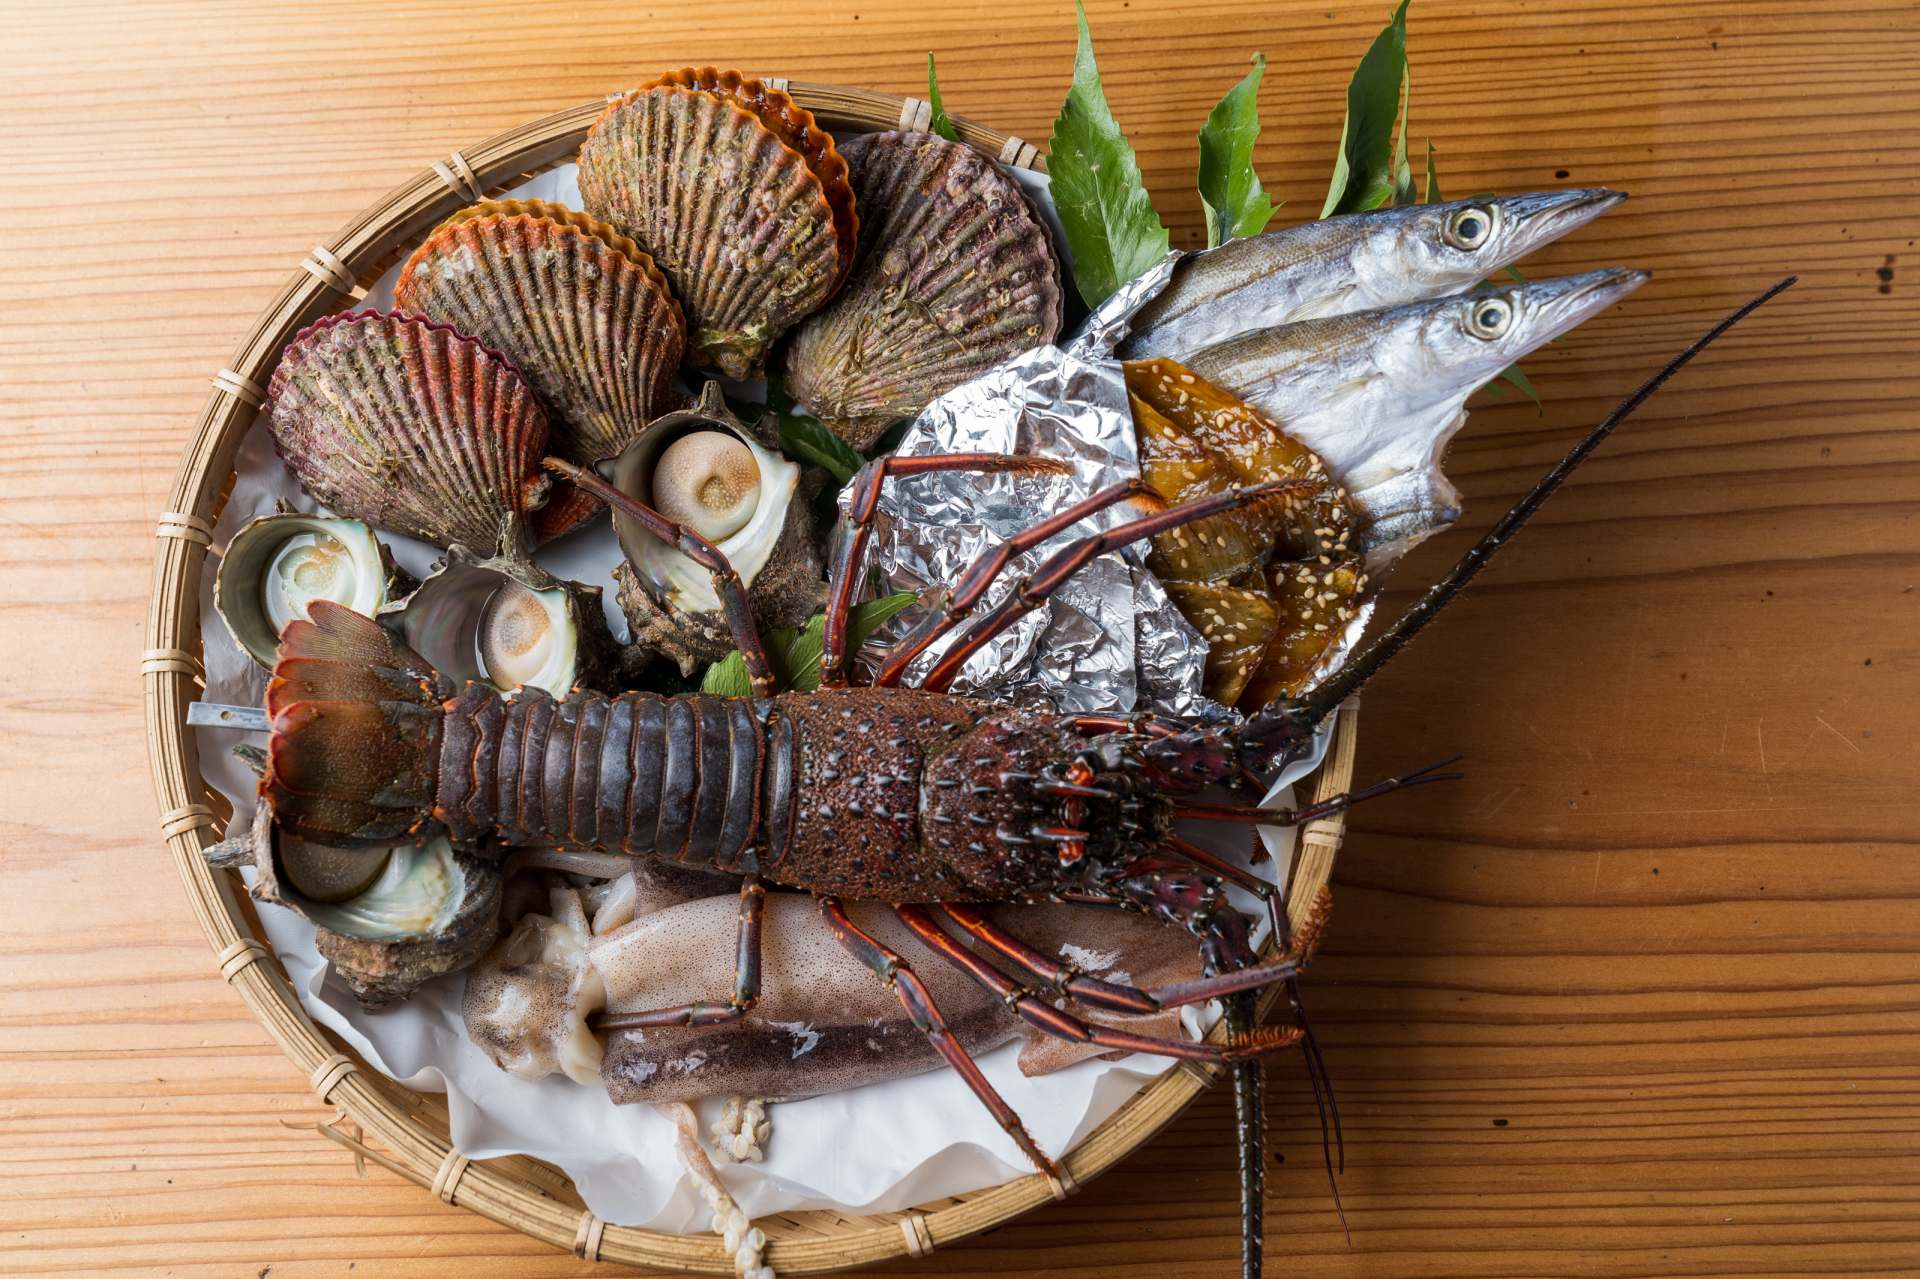 Fresh seafood from Ise-Shima, including lobsters, turban shells and noble scallops.